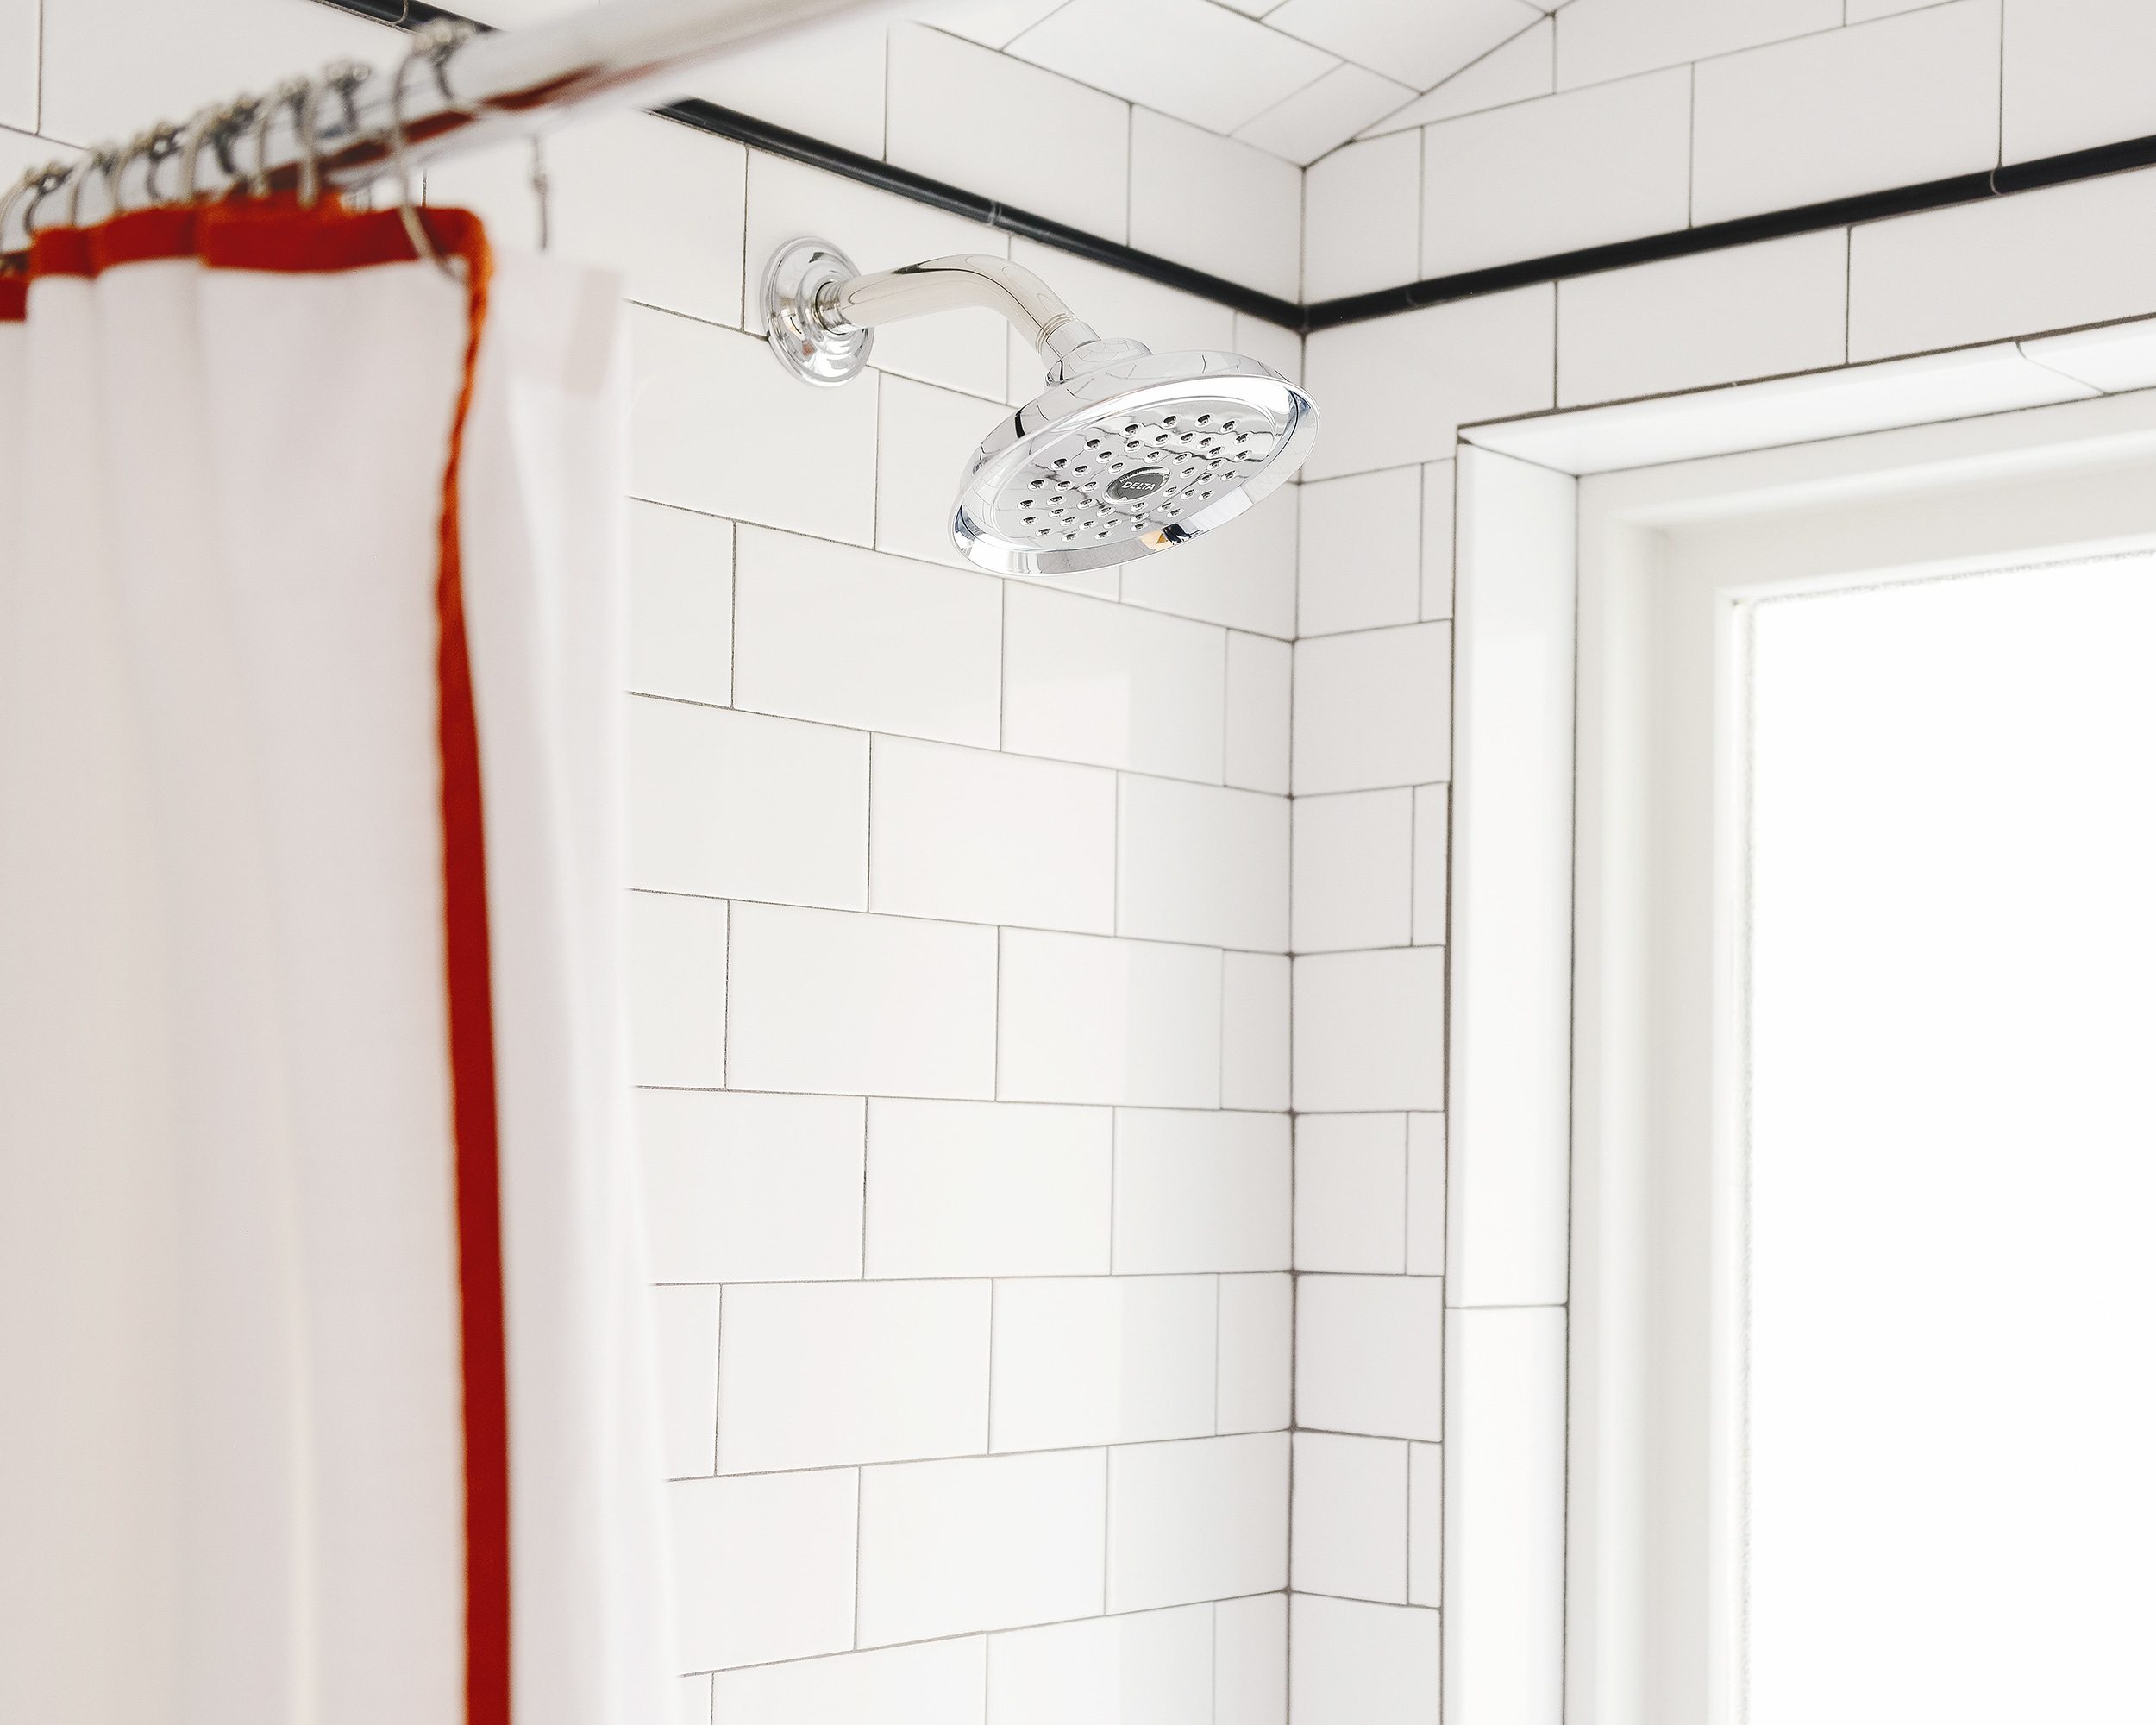 Delta shower fixtures in polished chrome | via Yellow Brick Home